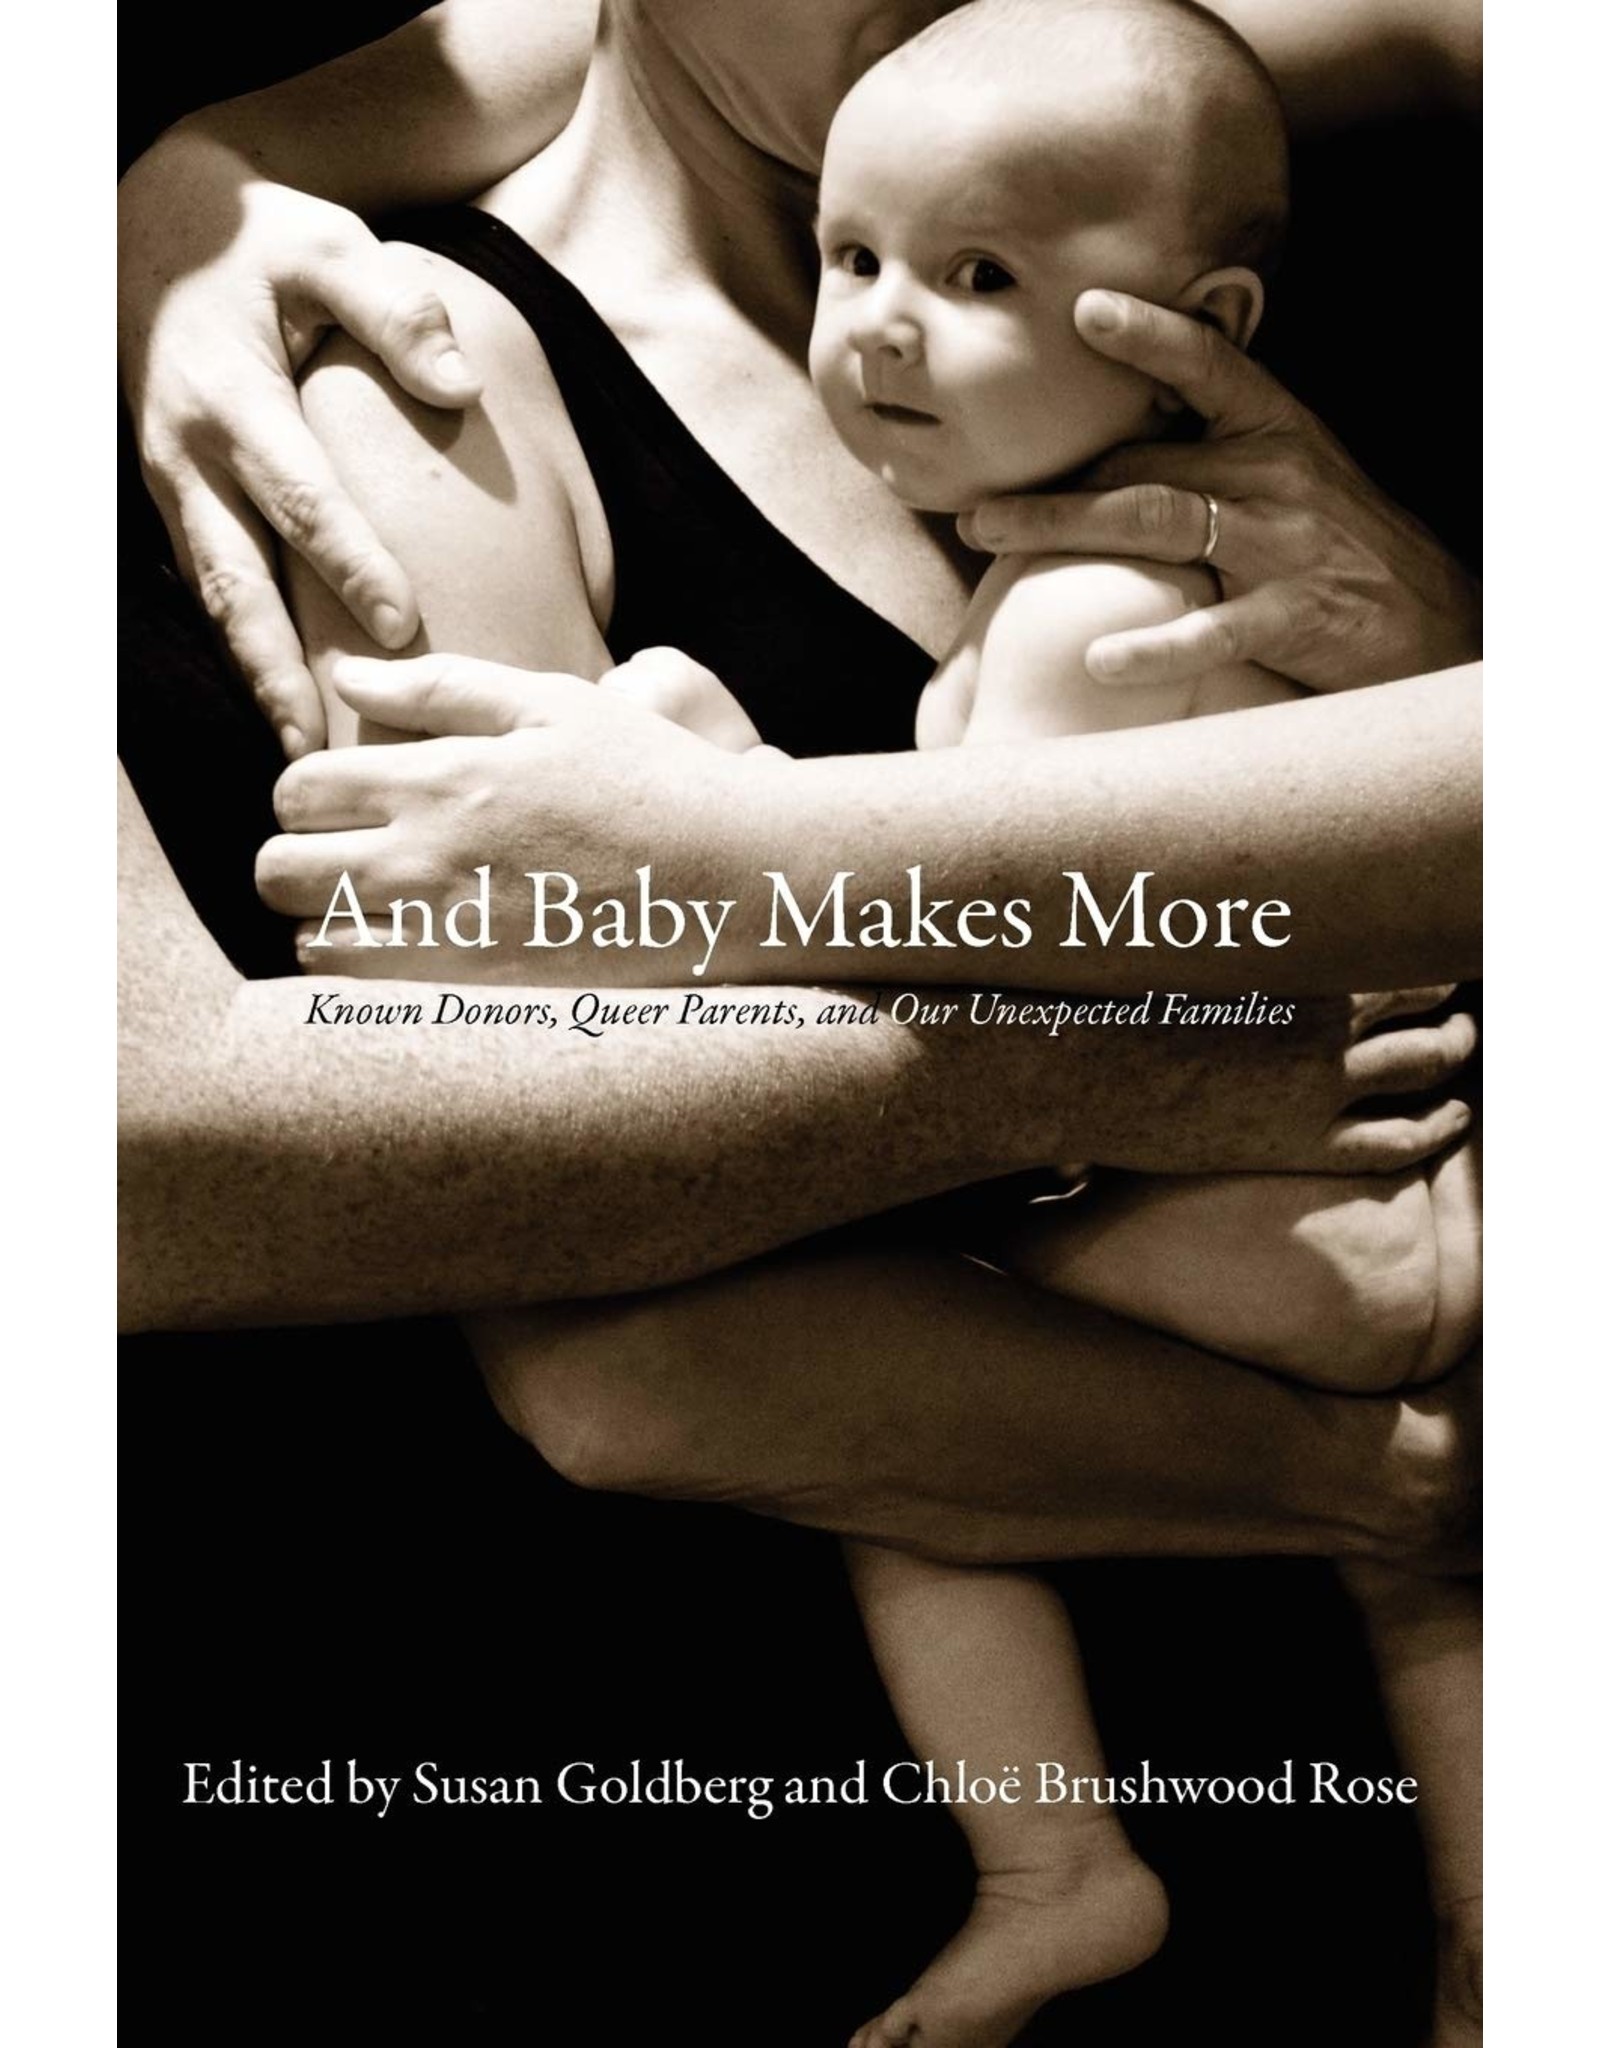 Literature And Baby Makes More: Known Donors, Queer Parents, and Our Unexpected Families.